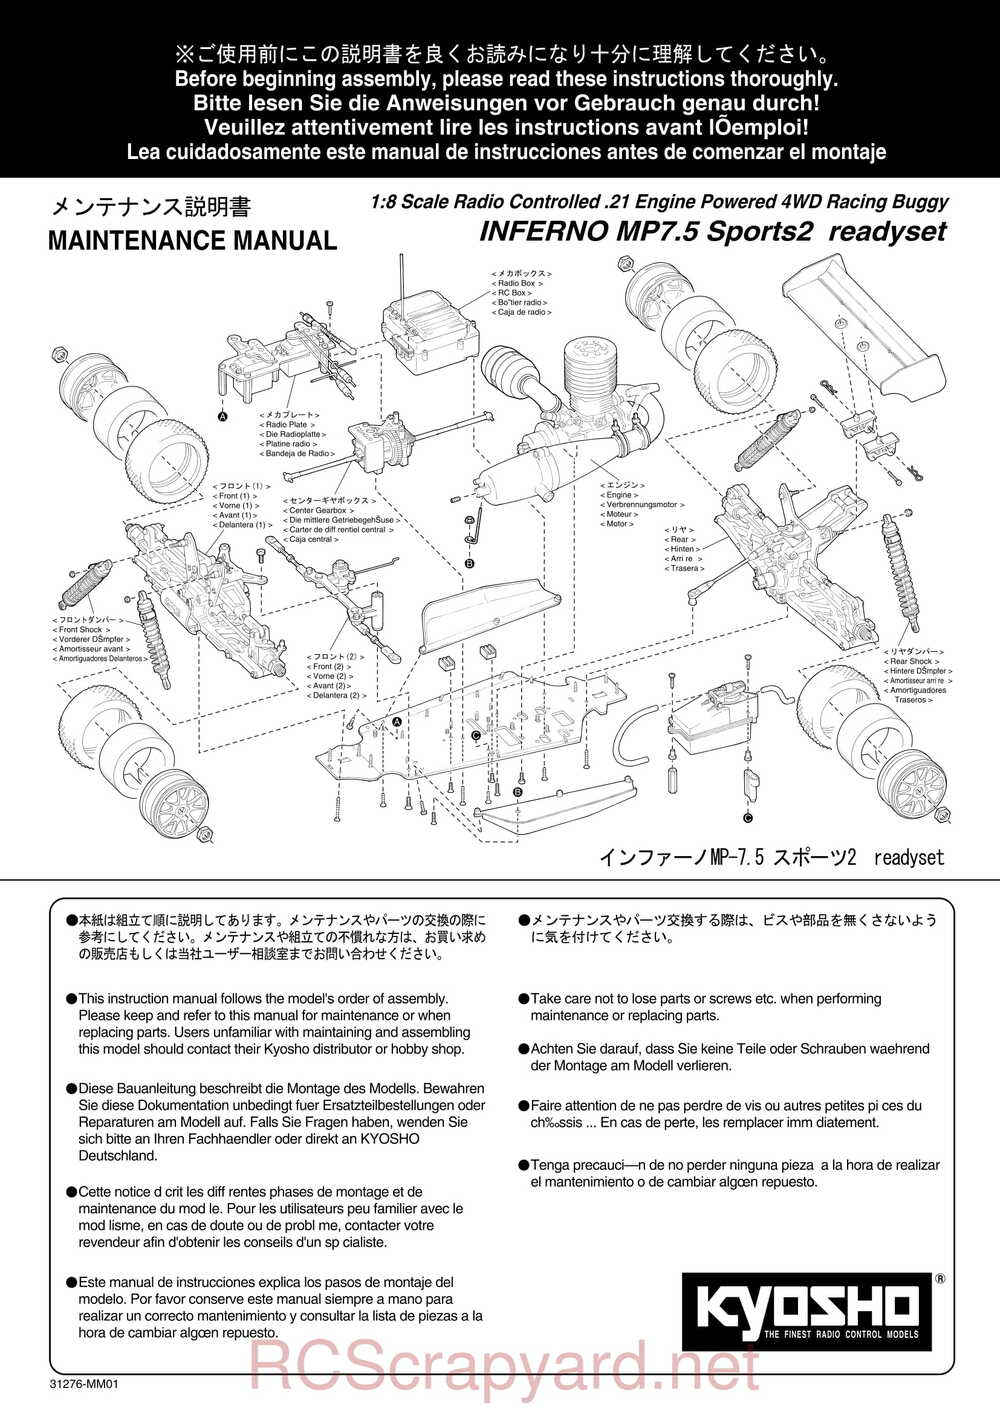 Kyosho - 31276 - Inferno MP7-5-SP2 - Manual - Page 01